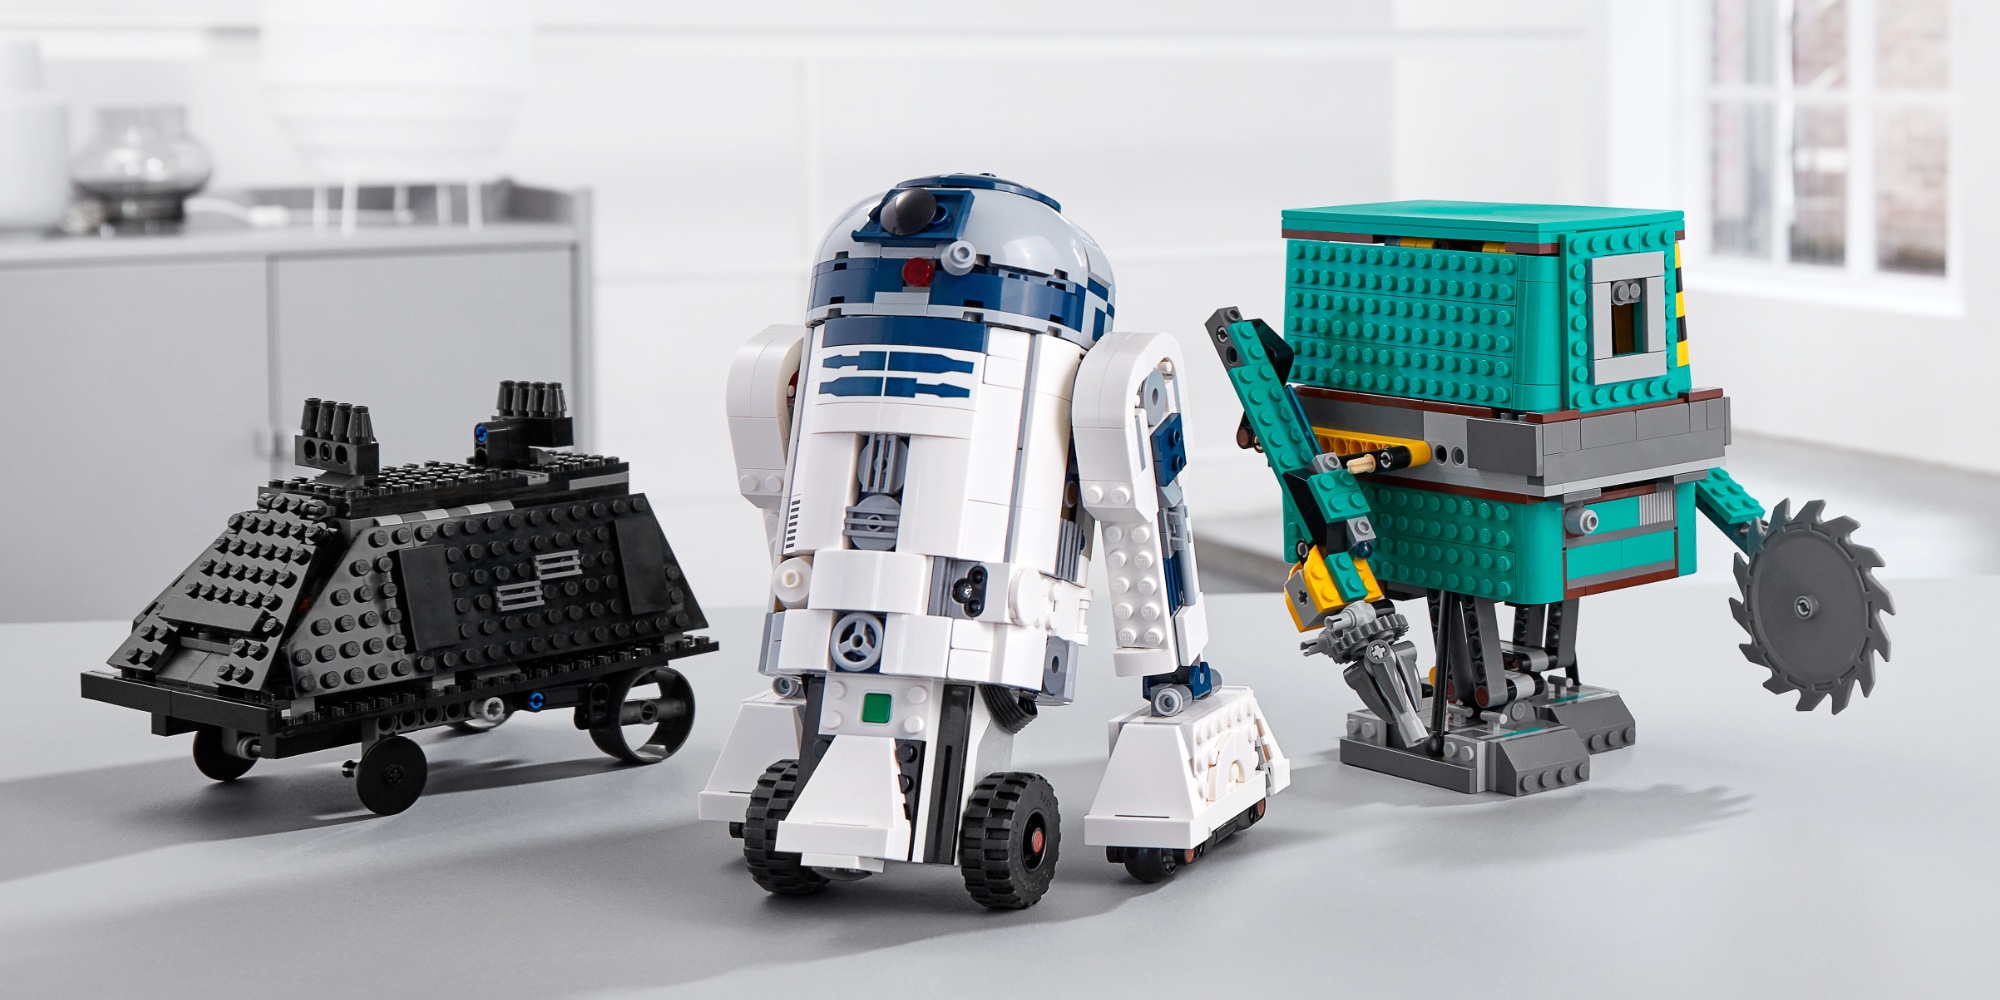 LEGO R2-D2 review: Most detailed version of the droid yet - 9to5Toys